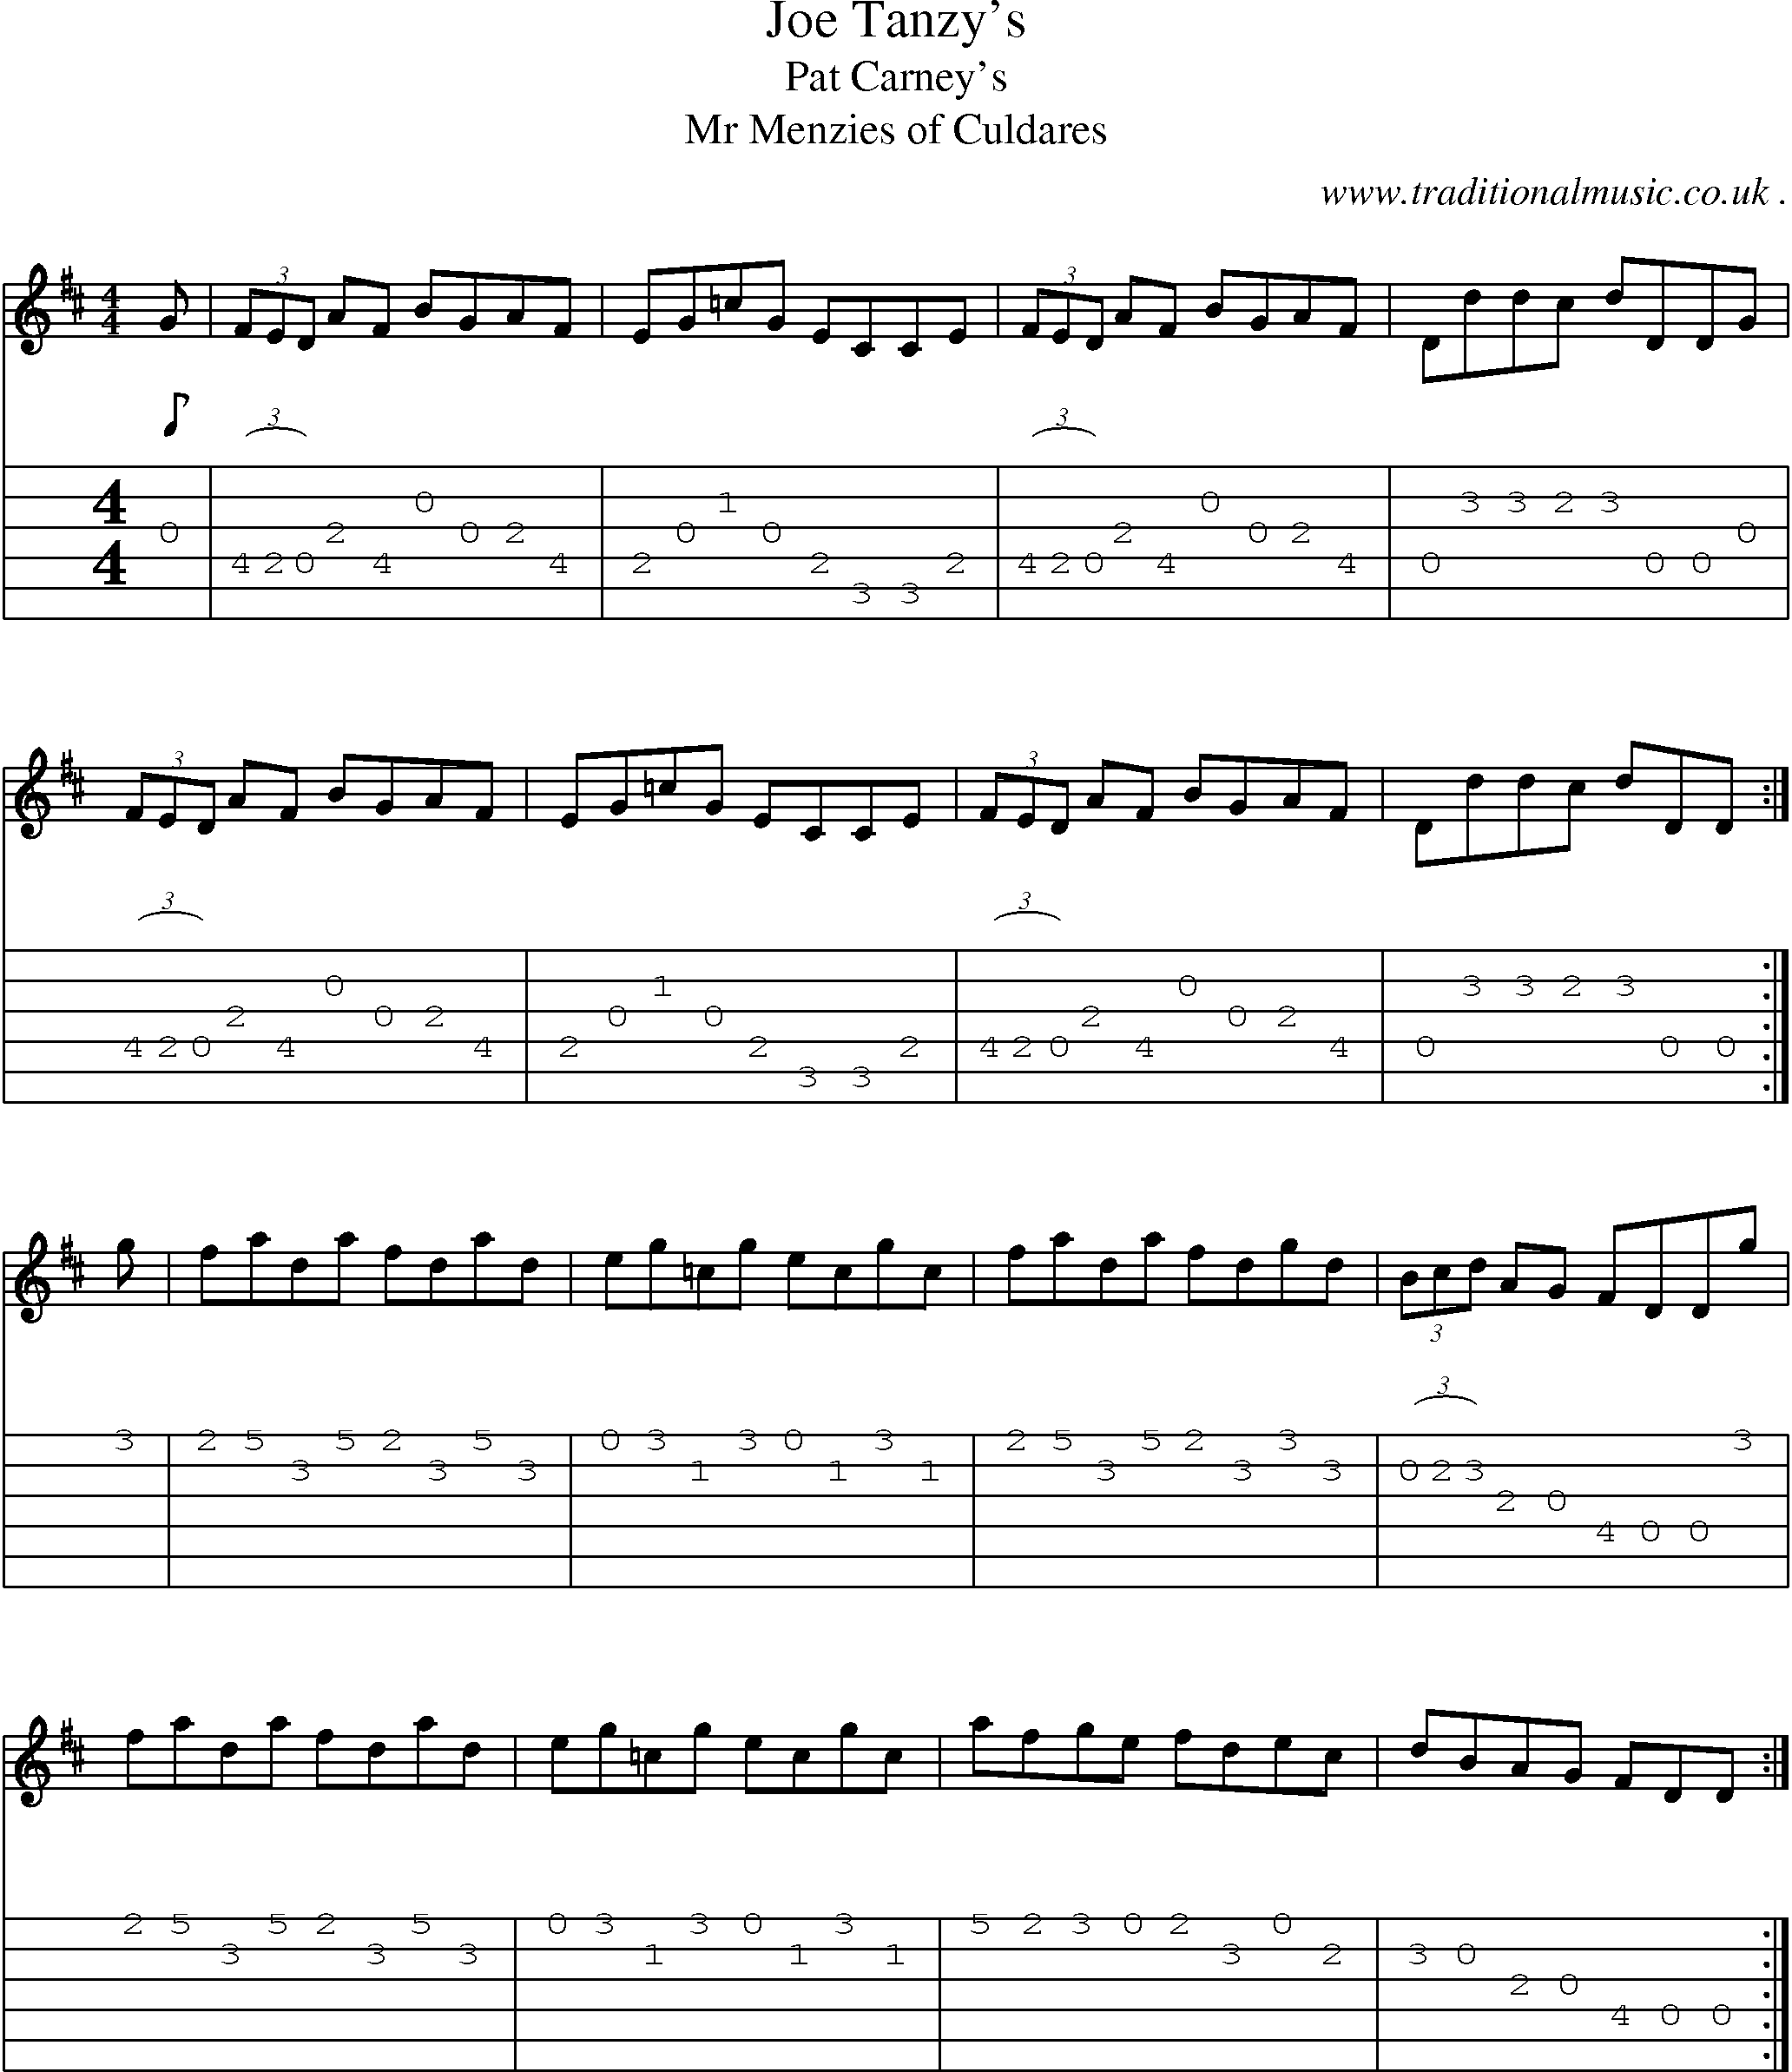 Sheet-music  score, Chords and Guitar Tabs for Joe Tanzys